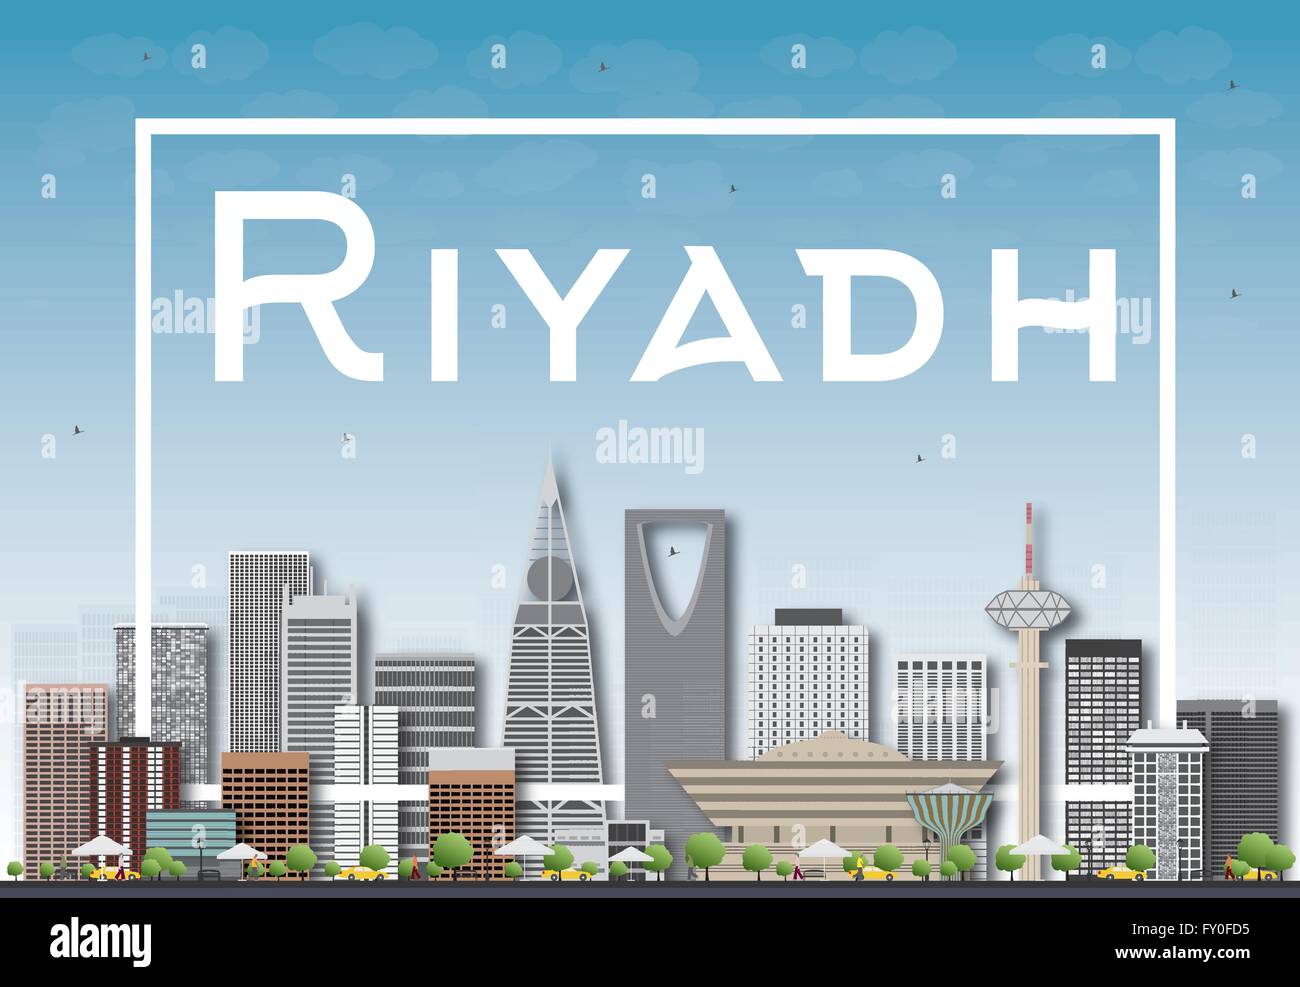 Riyadh skyline with gray buildings and white frame. Vector illustration. Business and tourism concept with skyscrapers. Stock Vector